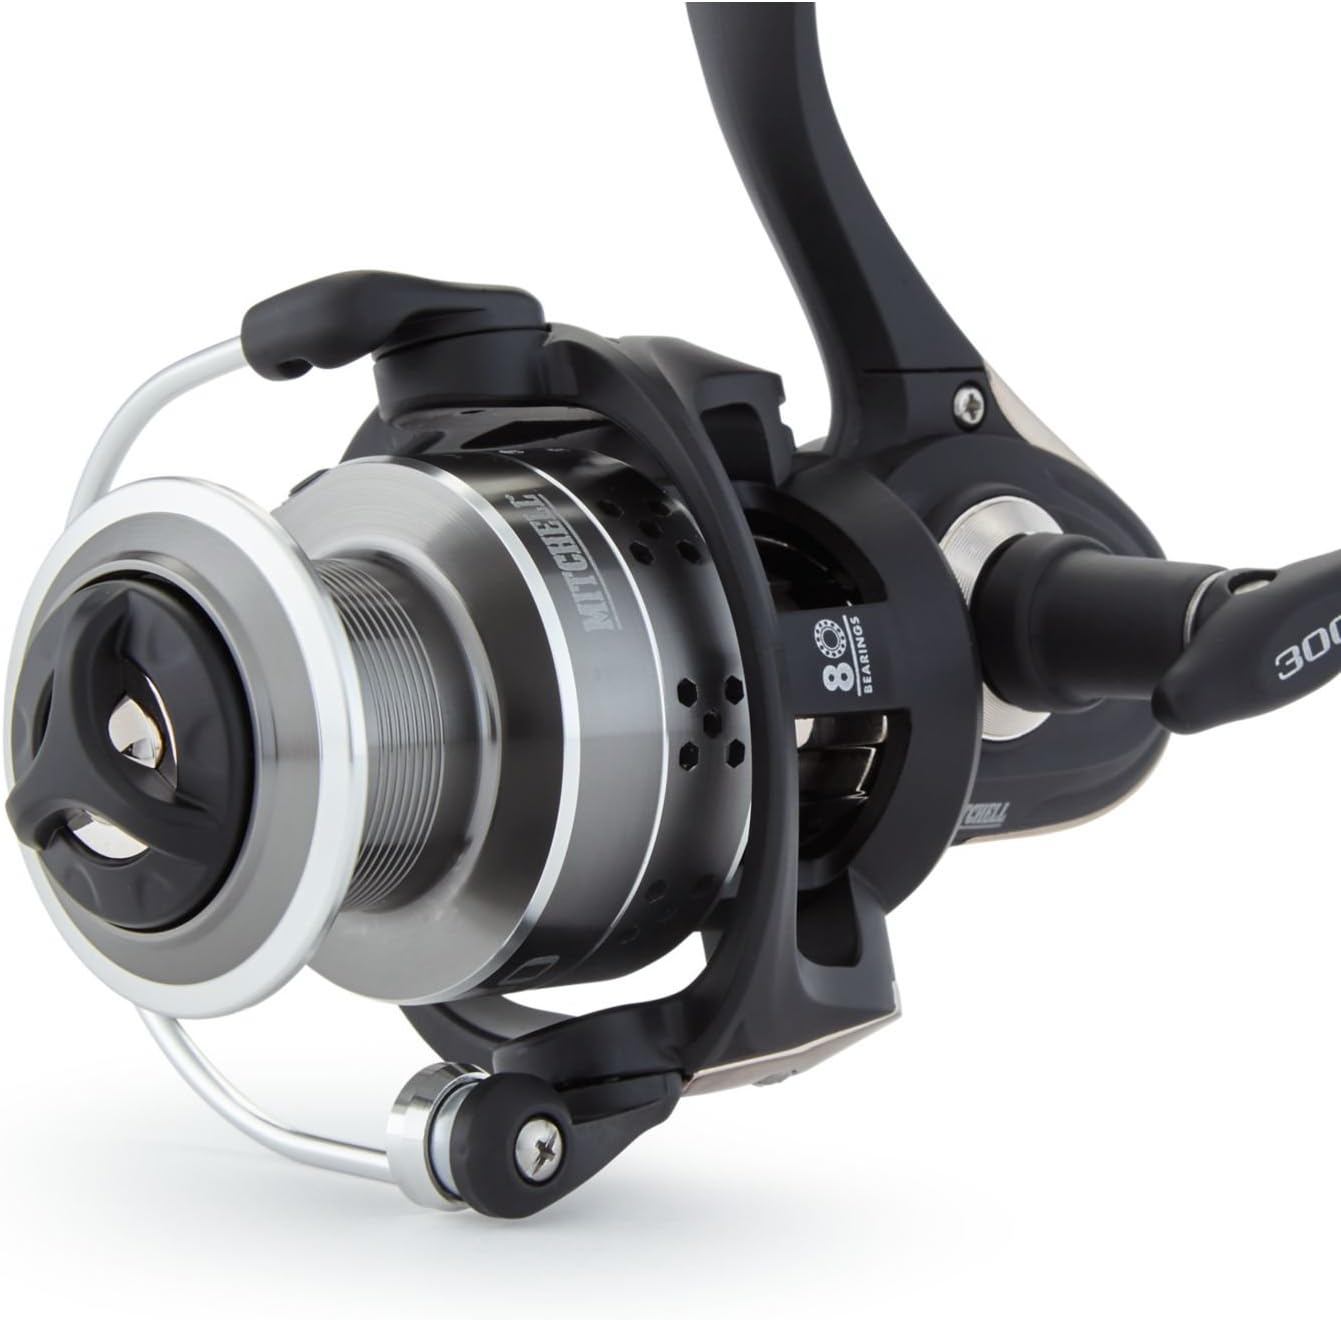 Mitchell 300 Spinning Fishing Reel Review